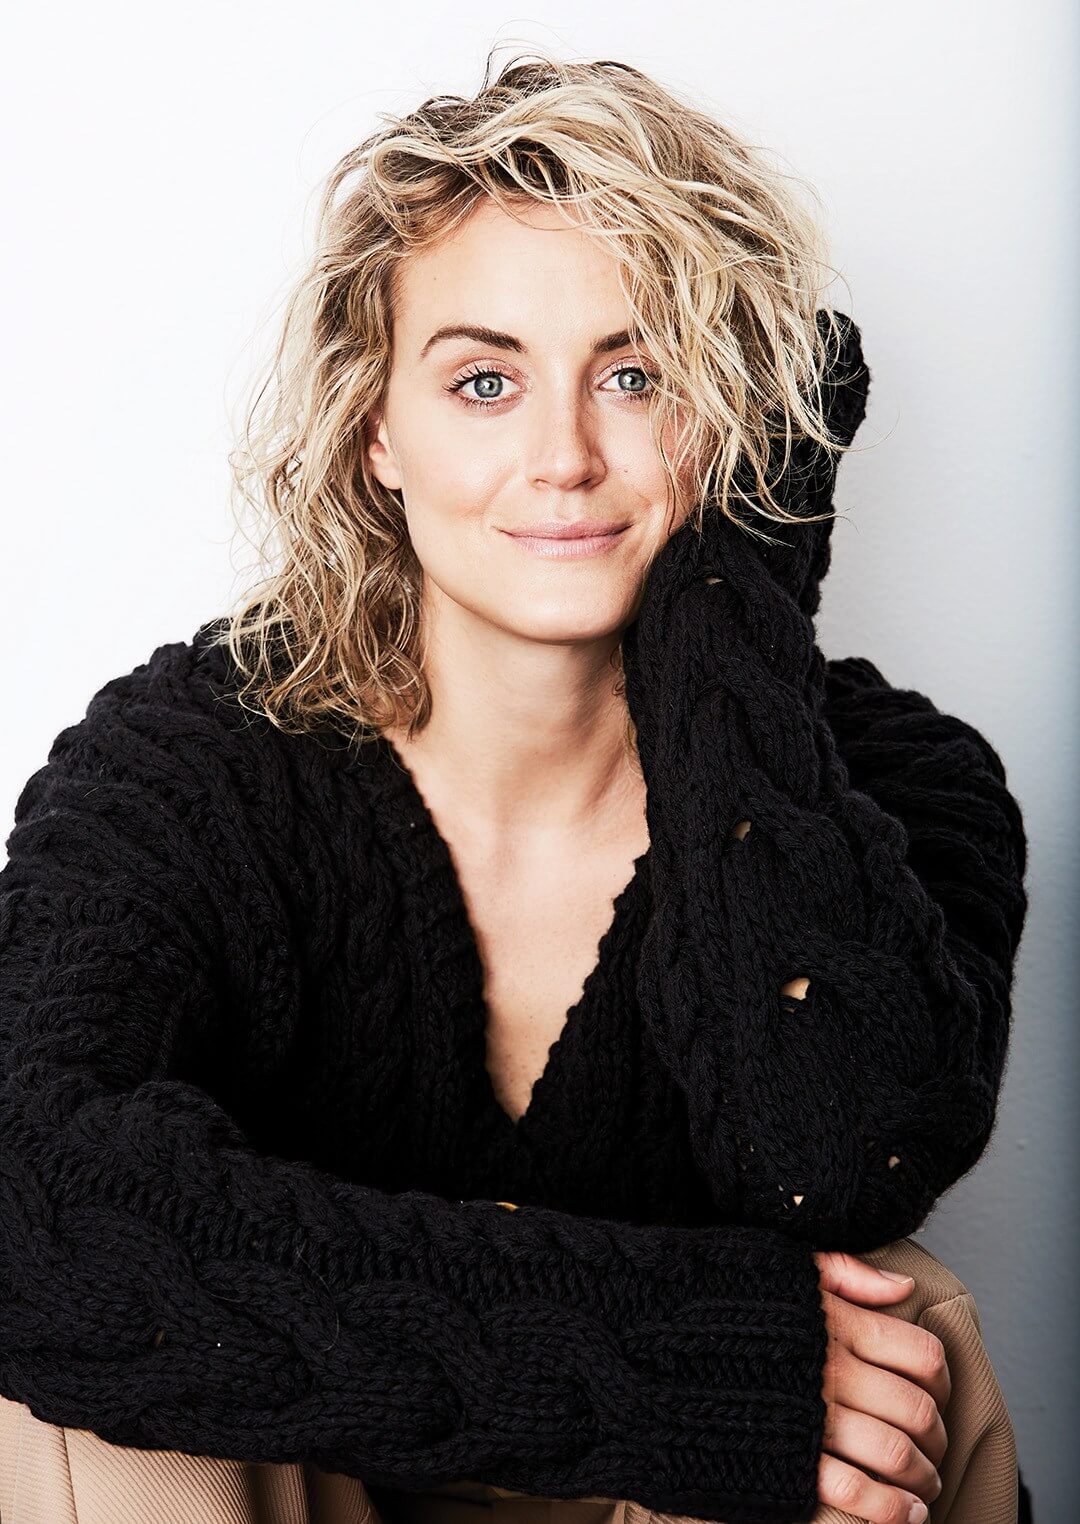 The Hottest Taylor Schilling Photos Around The Net.